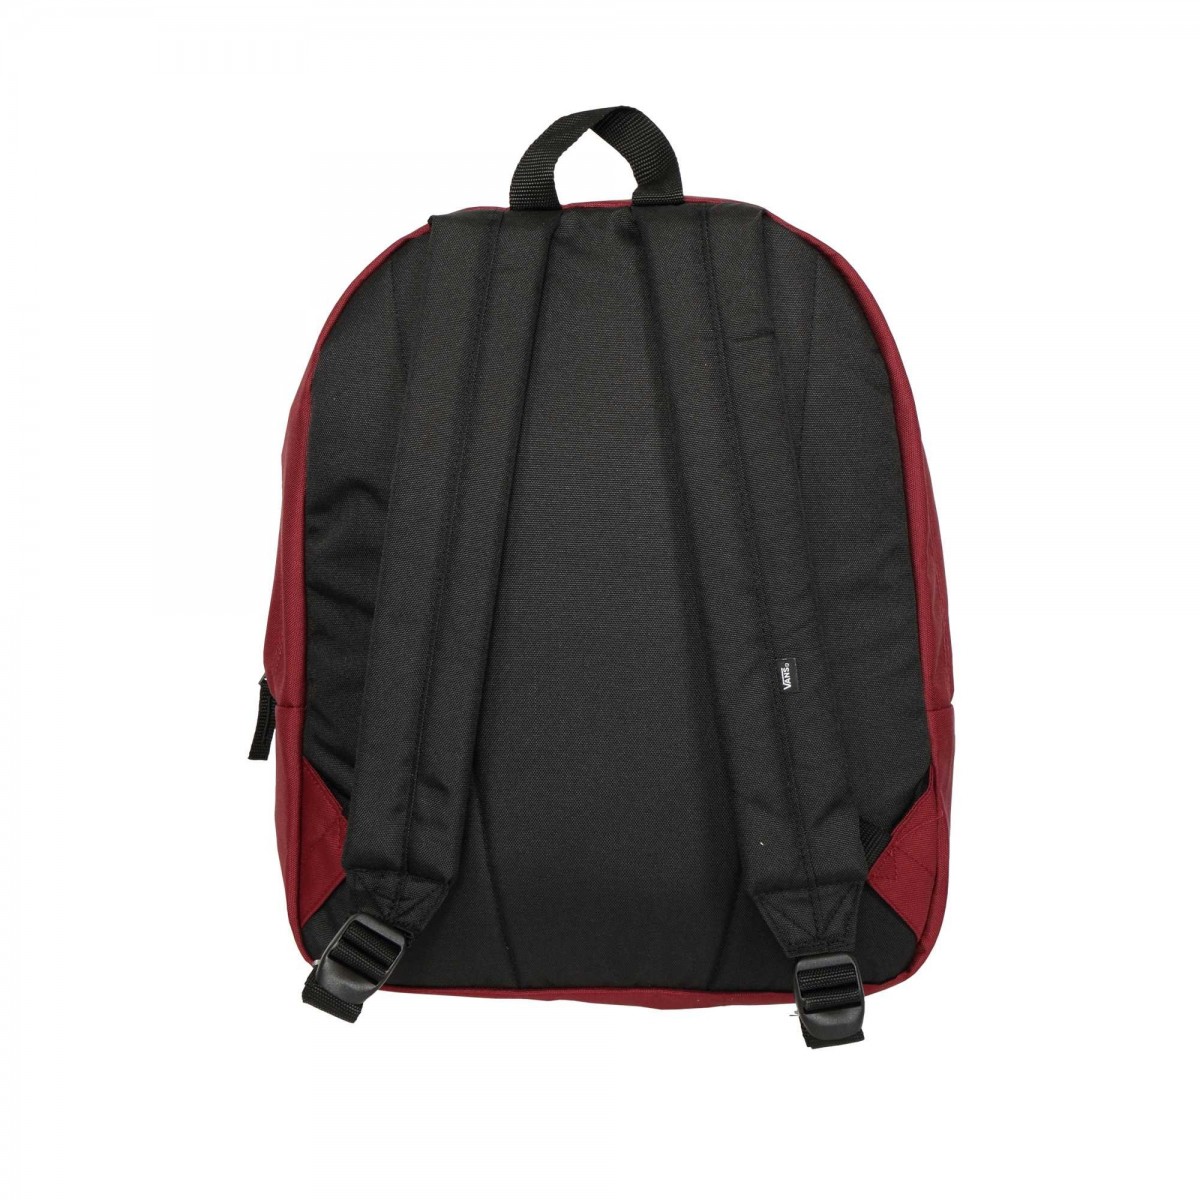 WM REALM BACKPACK POMEGRANATE